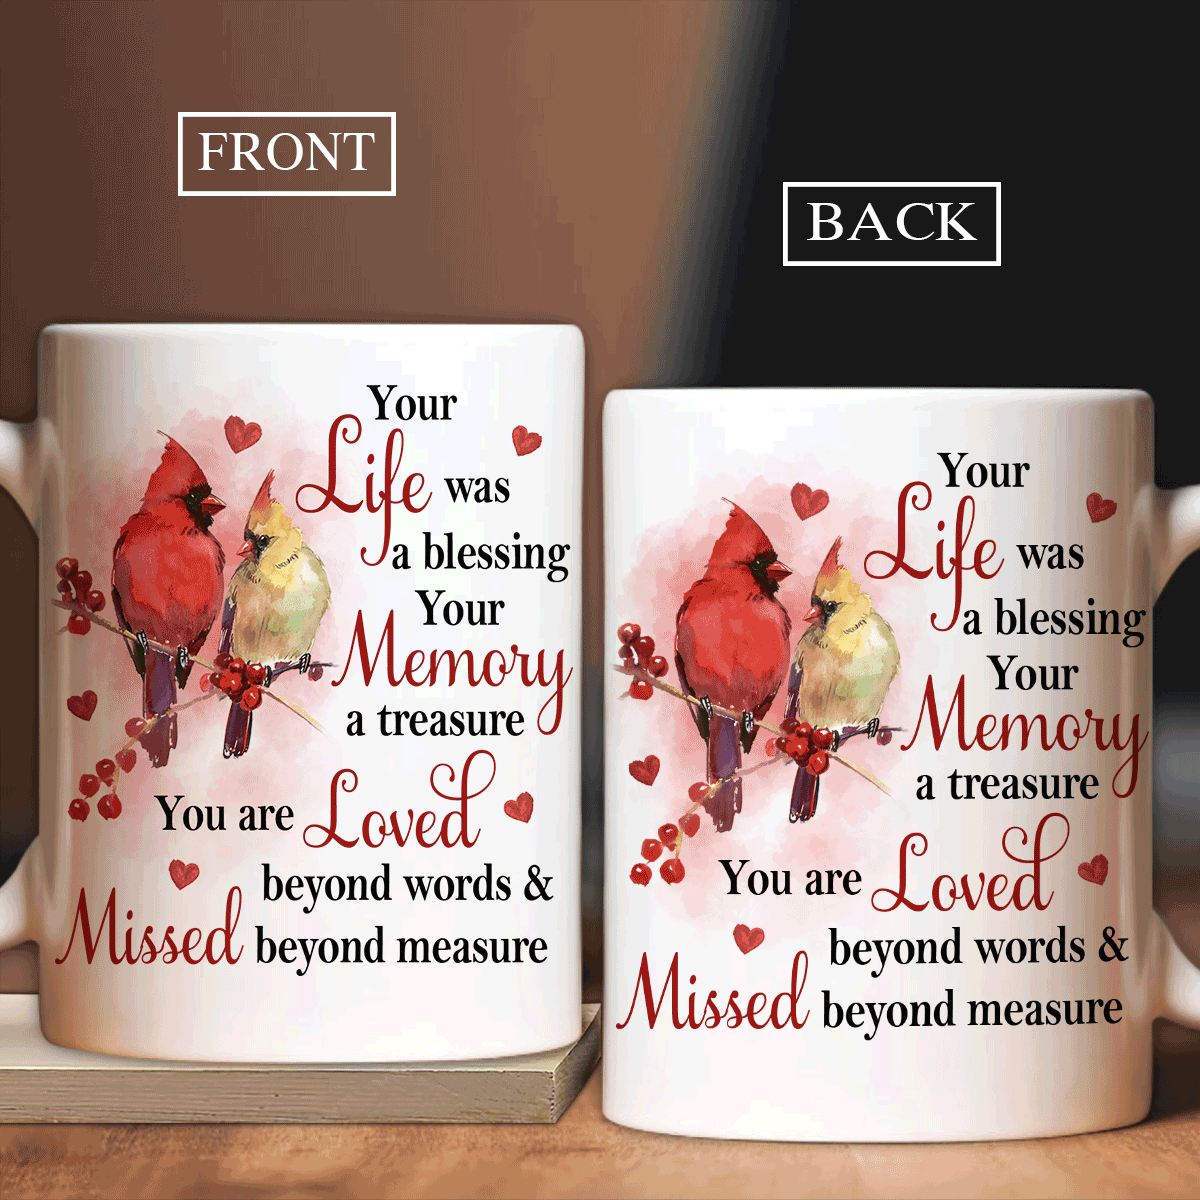 Memorial White Mug - Red cranberry, Watercolor cardinal, Heart symbol - Gift for members family - Your life was a blessing - Heaven White Mug.